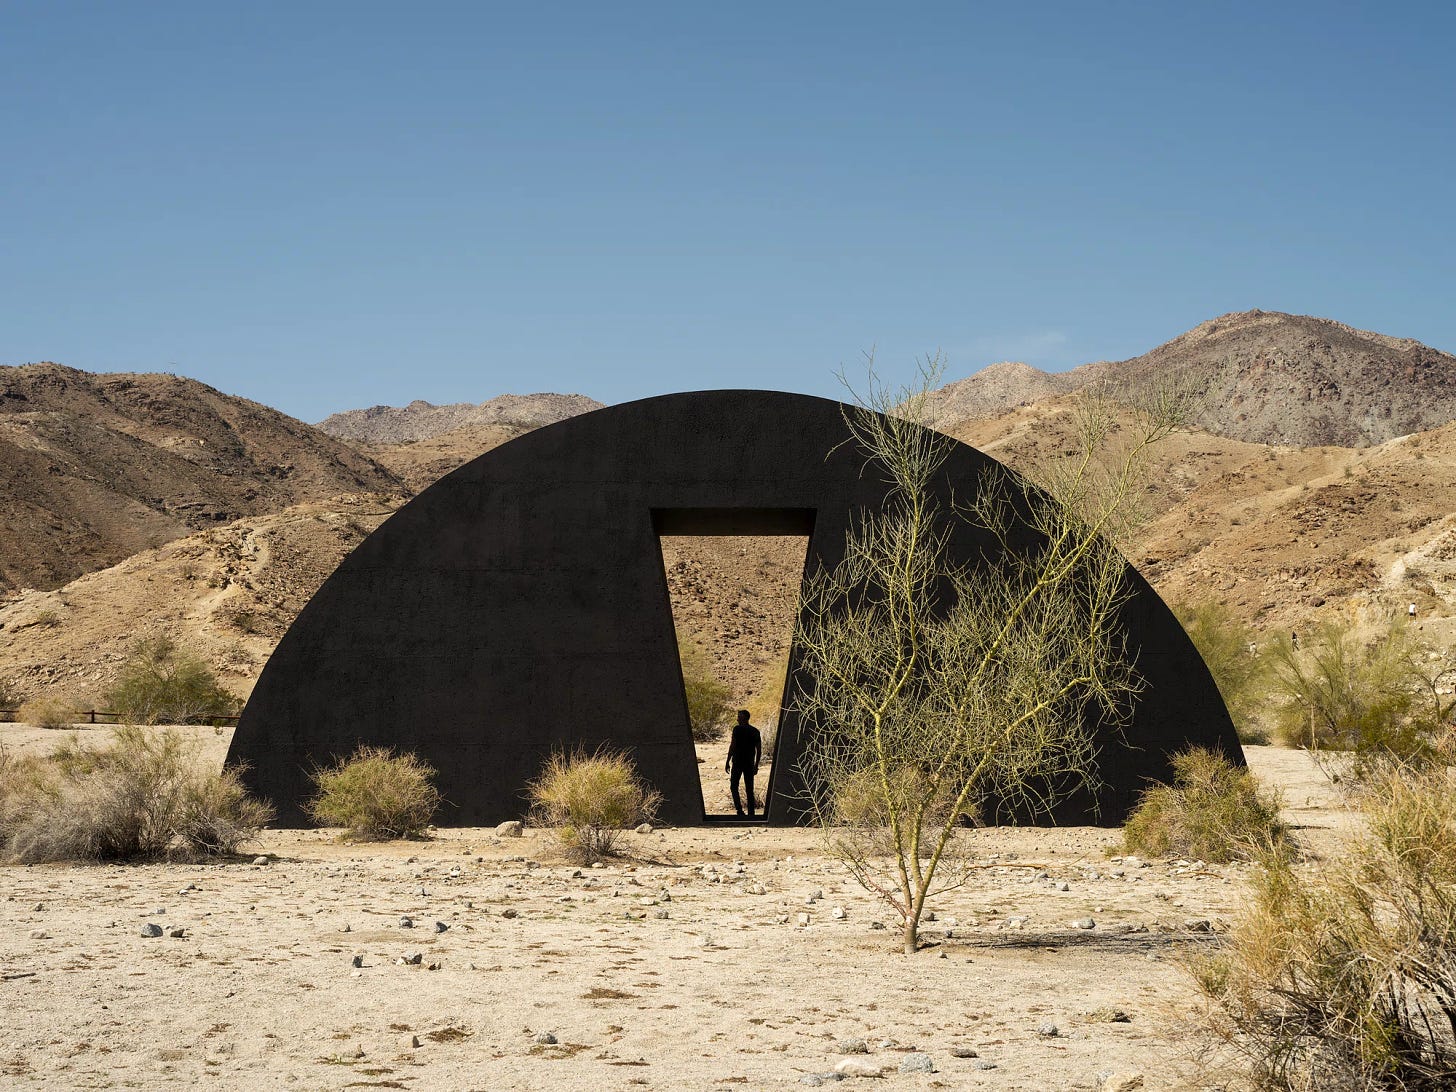 A black scuplture the shape of a half moon emerging from the desert landscape with a person walking through a portal, or path, or keyhole cut out the shape of a long upside down triangle with the tip cut off.